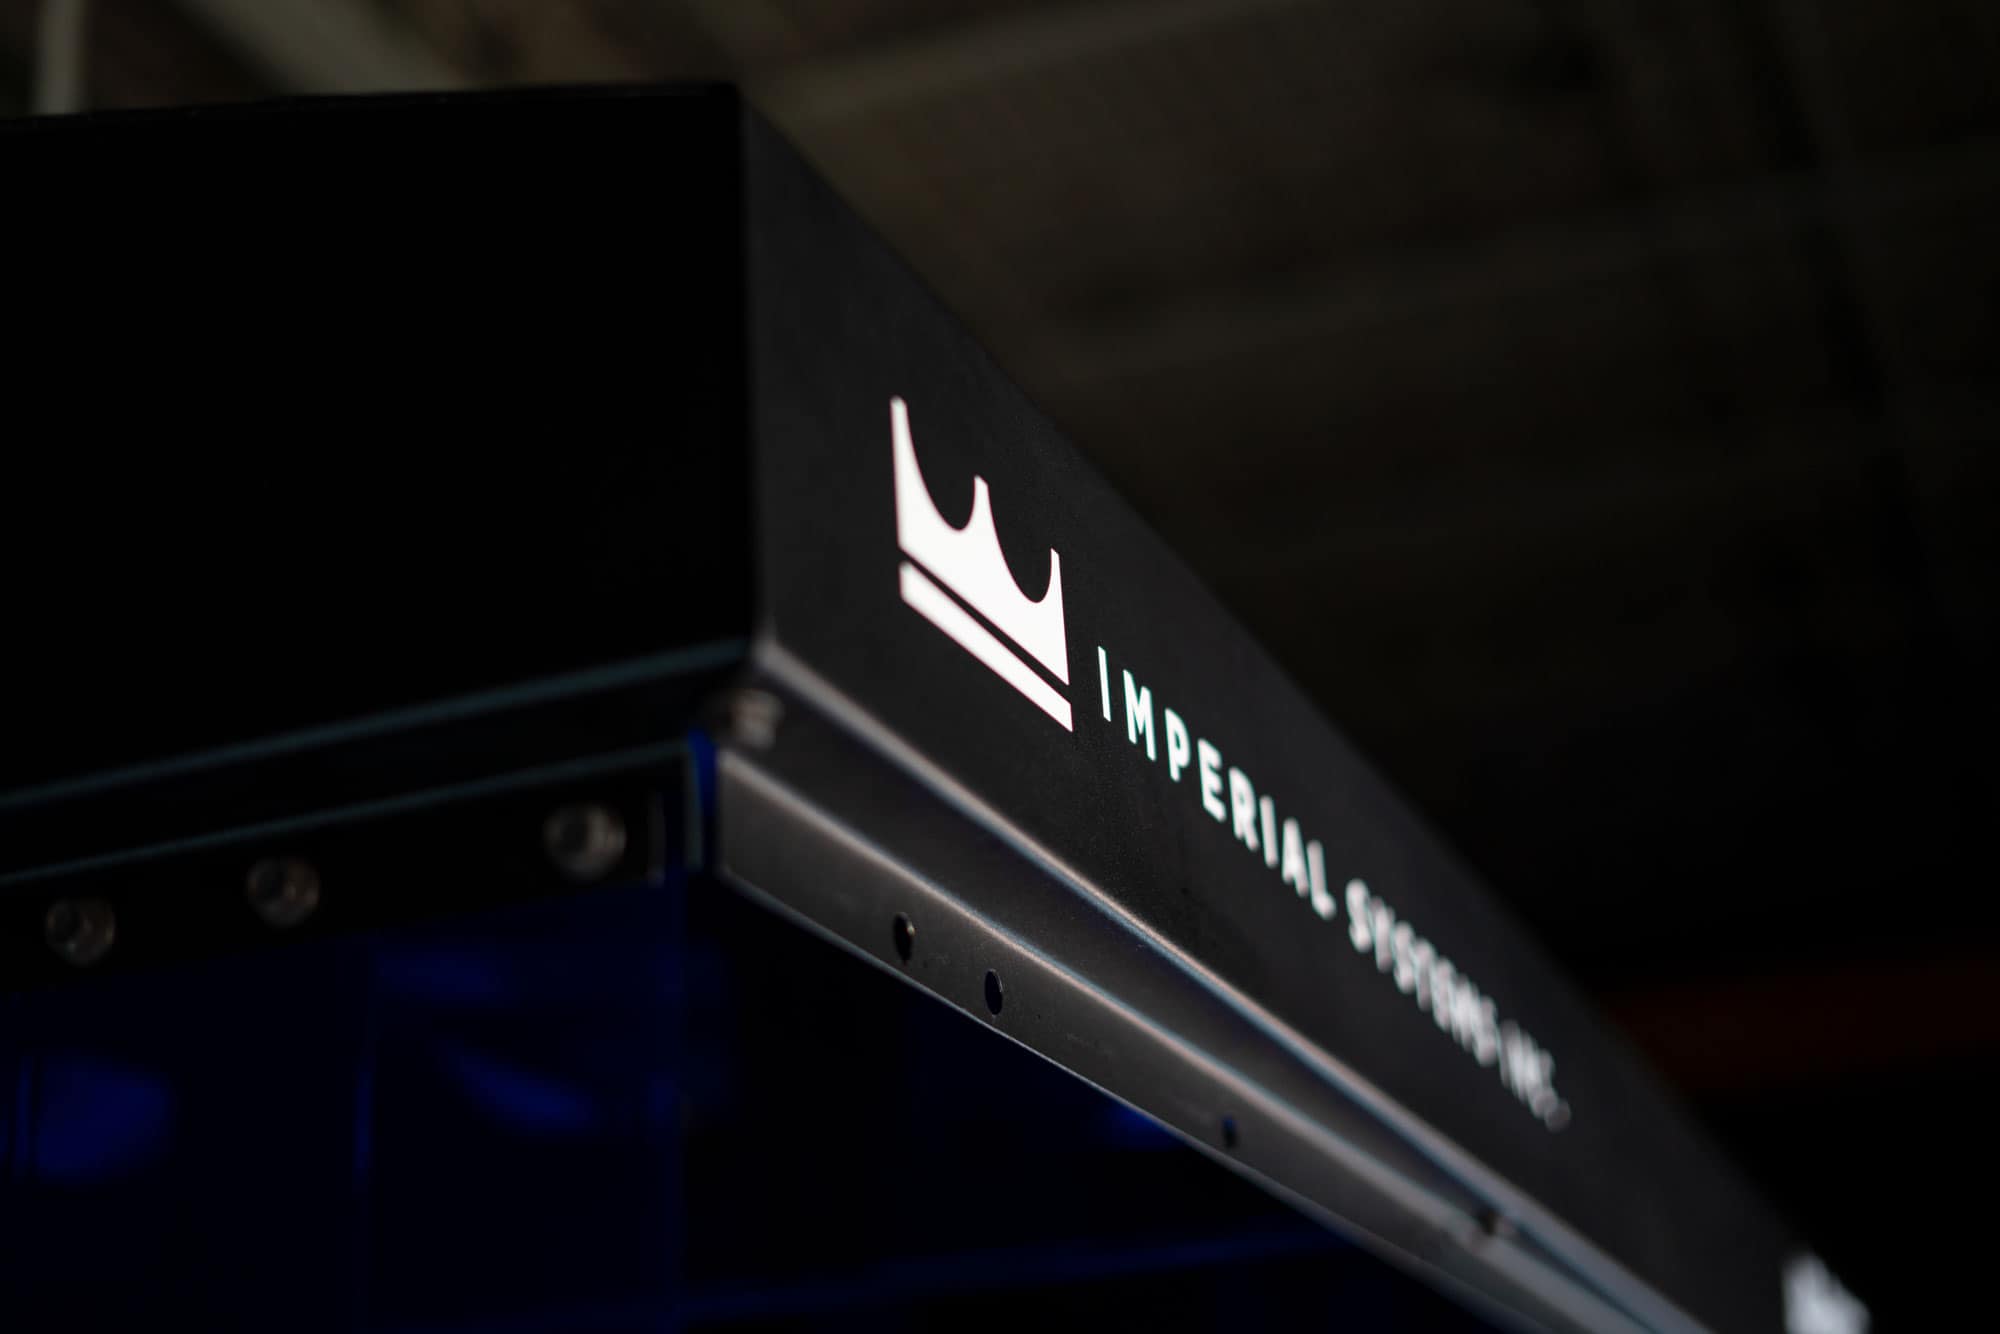 Closeup of the Imperial Systems logo on the Air-Port Fume Exhaust Hood